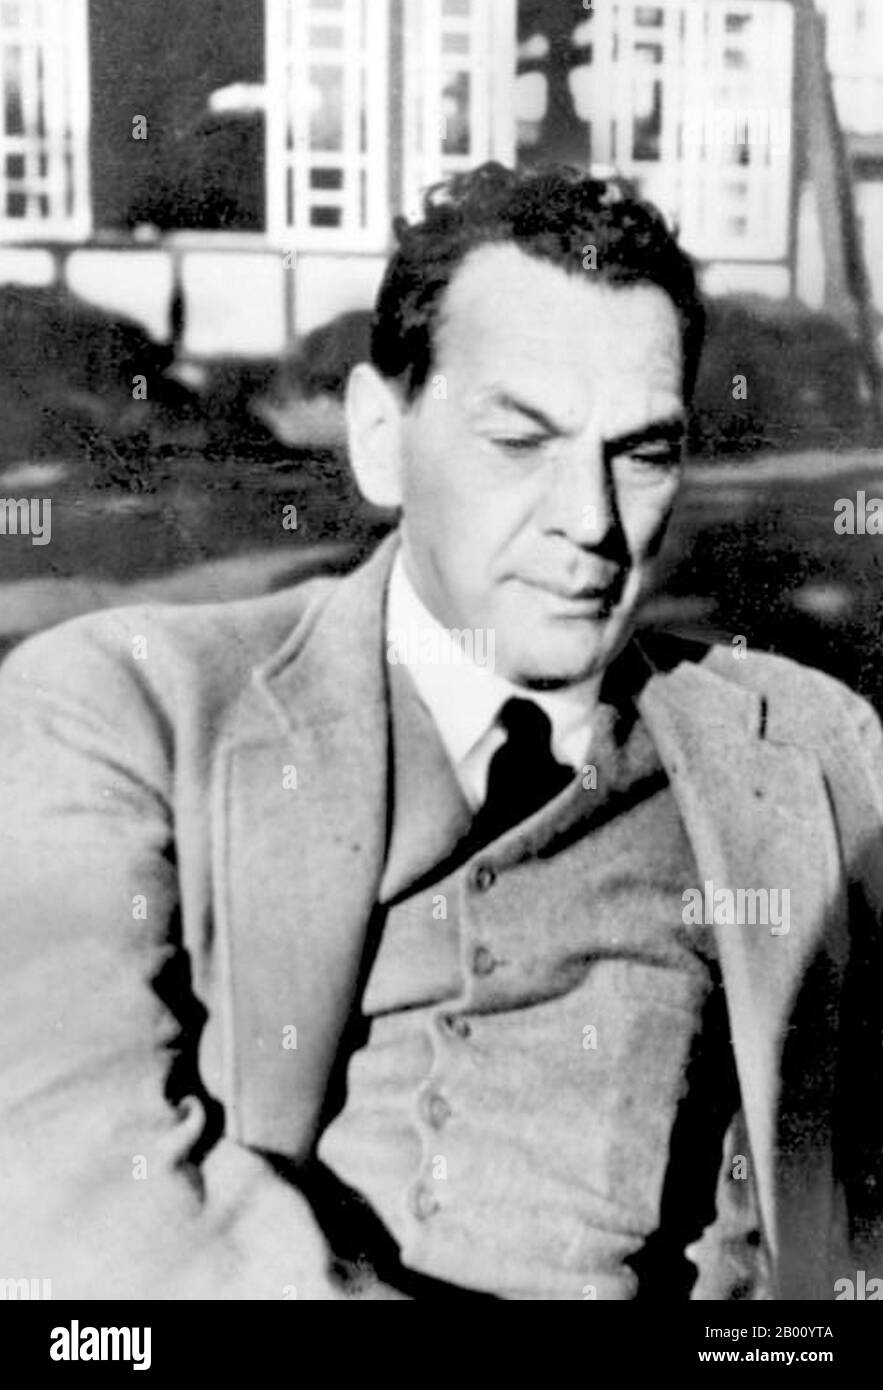 Germany/Soviet Union: Dr Richard Sorge (1895-1944), Soviet Spy and Anti-Fascist, Hero of the Soviet Union.  Richard Sorge (October 4, 1895 - November 7, 1944) was an anti-fascist and intelligence officer who worked for the Soviet Union. He had gained great fame among espionage enthusiasts for his intelligence gathering during World War II. He worked as a journalist in both Germany and Japan, where he was imprisoned for spying and eventually hanged.  His GRU codename was 'Ramsay'. He is widely regarded as one of the most productive and heroic Soviet intelligence officers of the Second World War Stock Photo